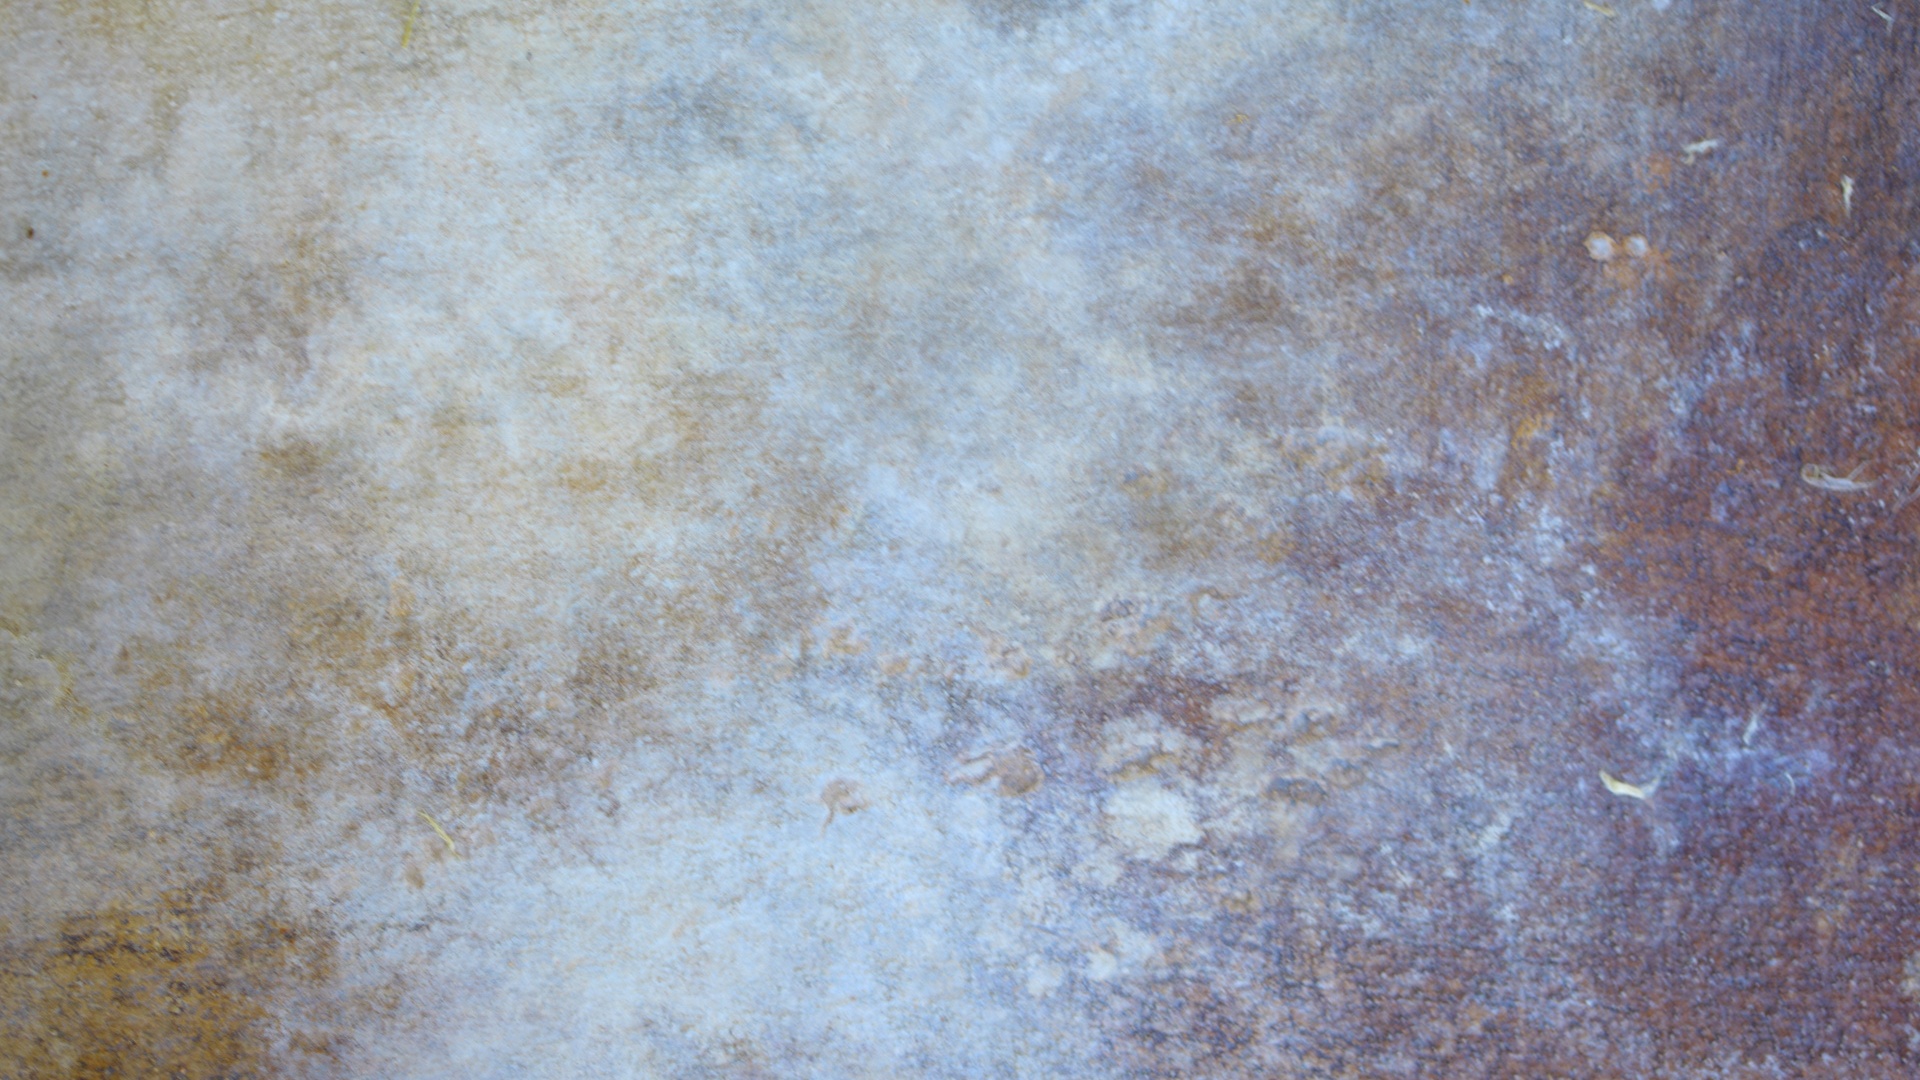 Milky Cloudy Rust Stained Pavement Texture